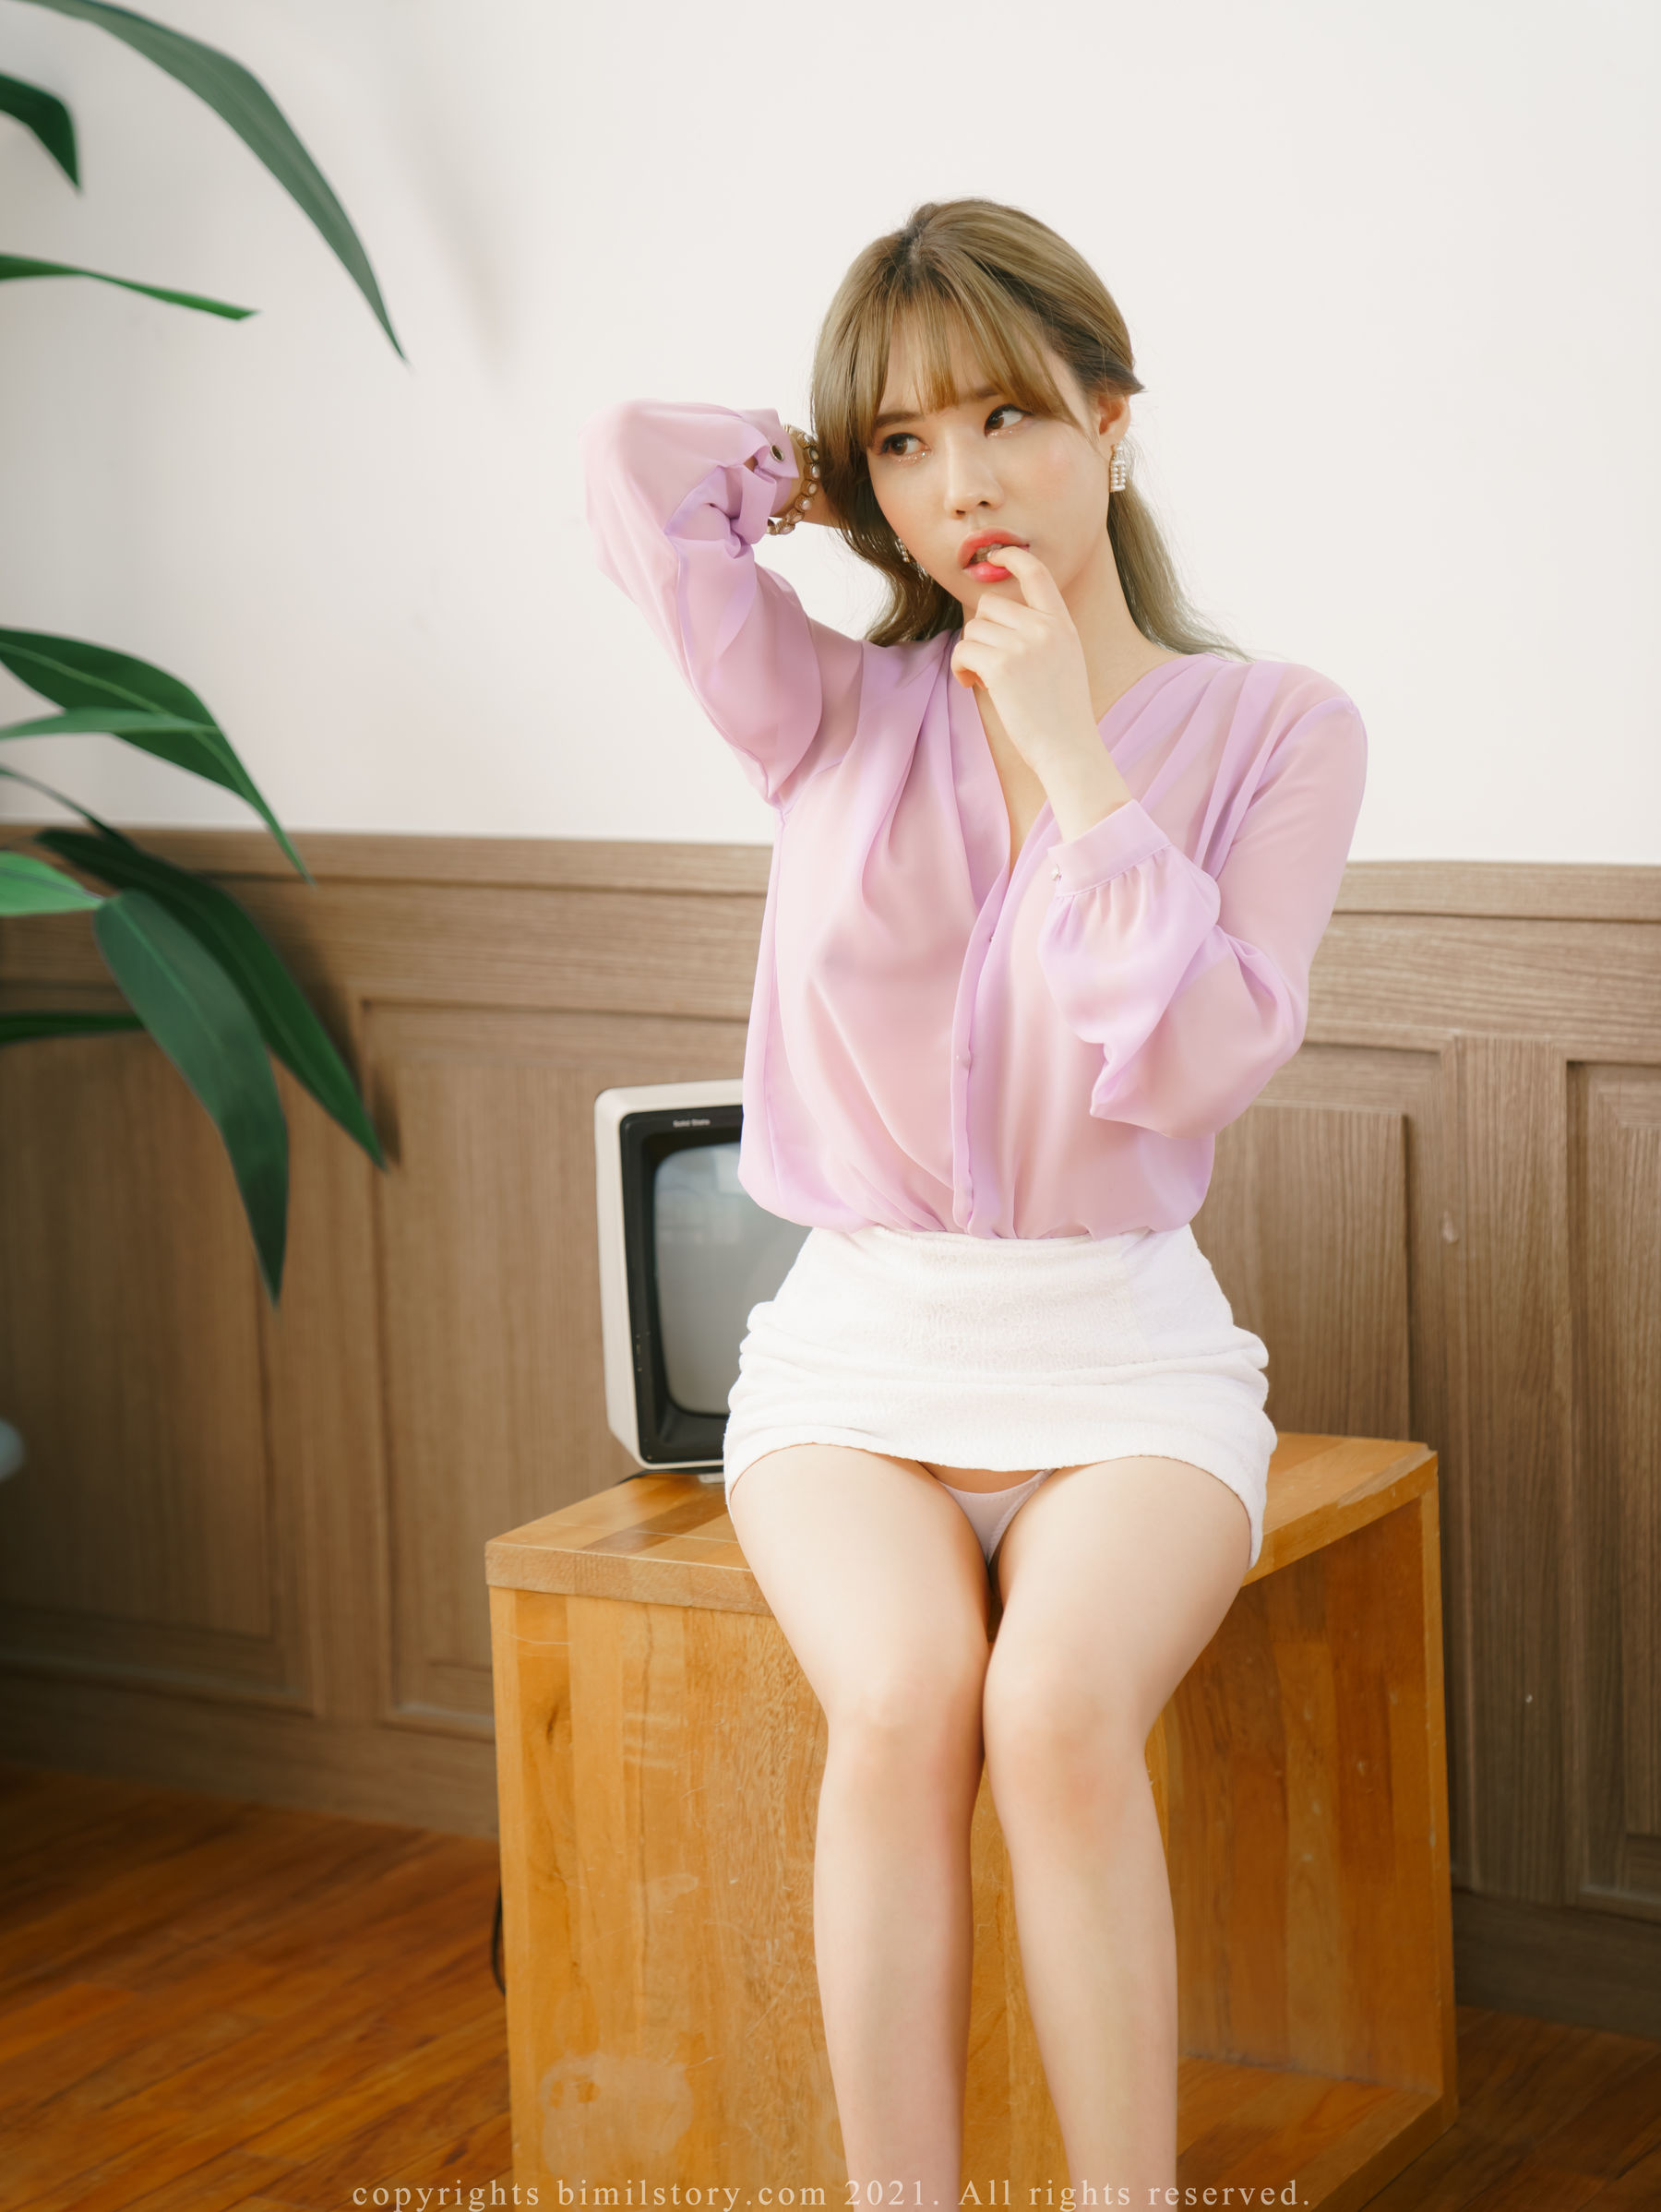 [Bimilstory] Eunha 2023.04.04 Vol.04 How to dress in case of F cup size woman  第25张